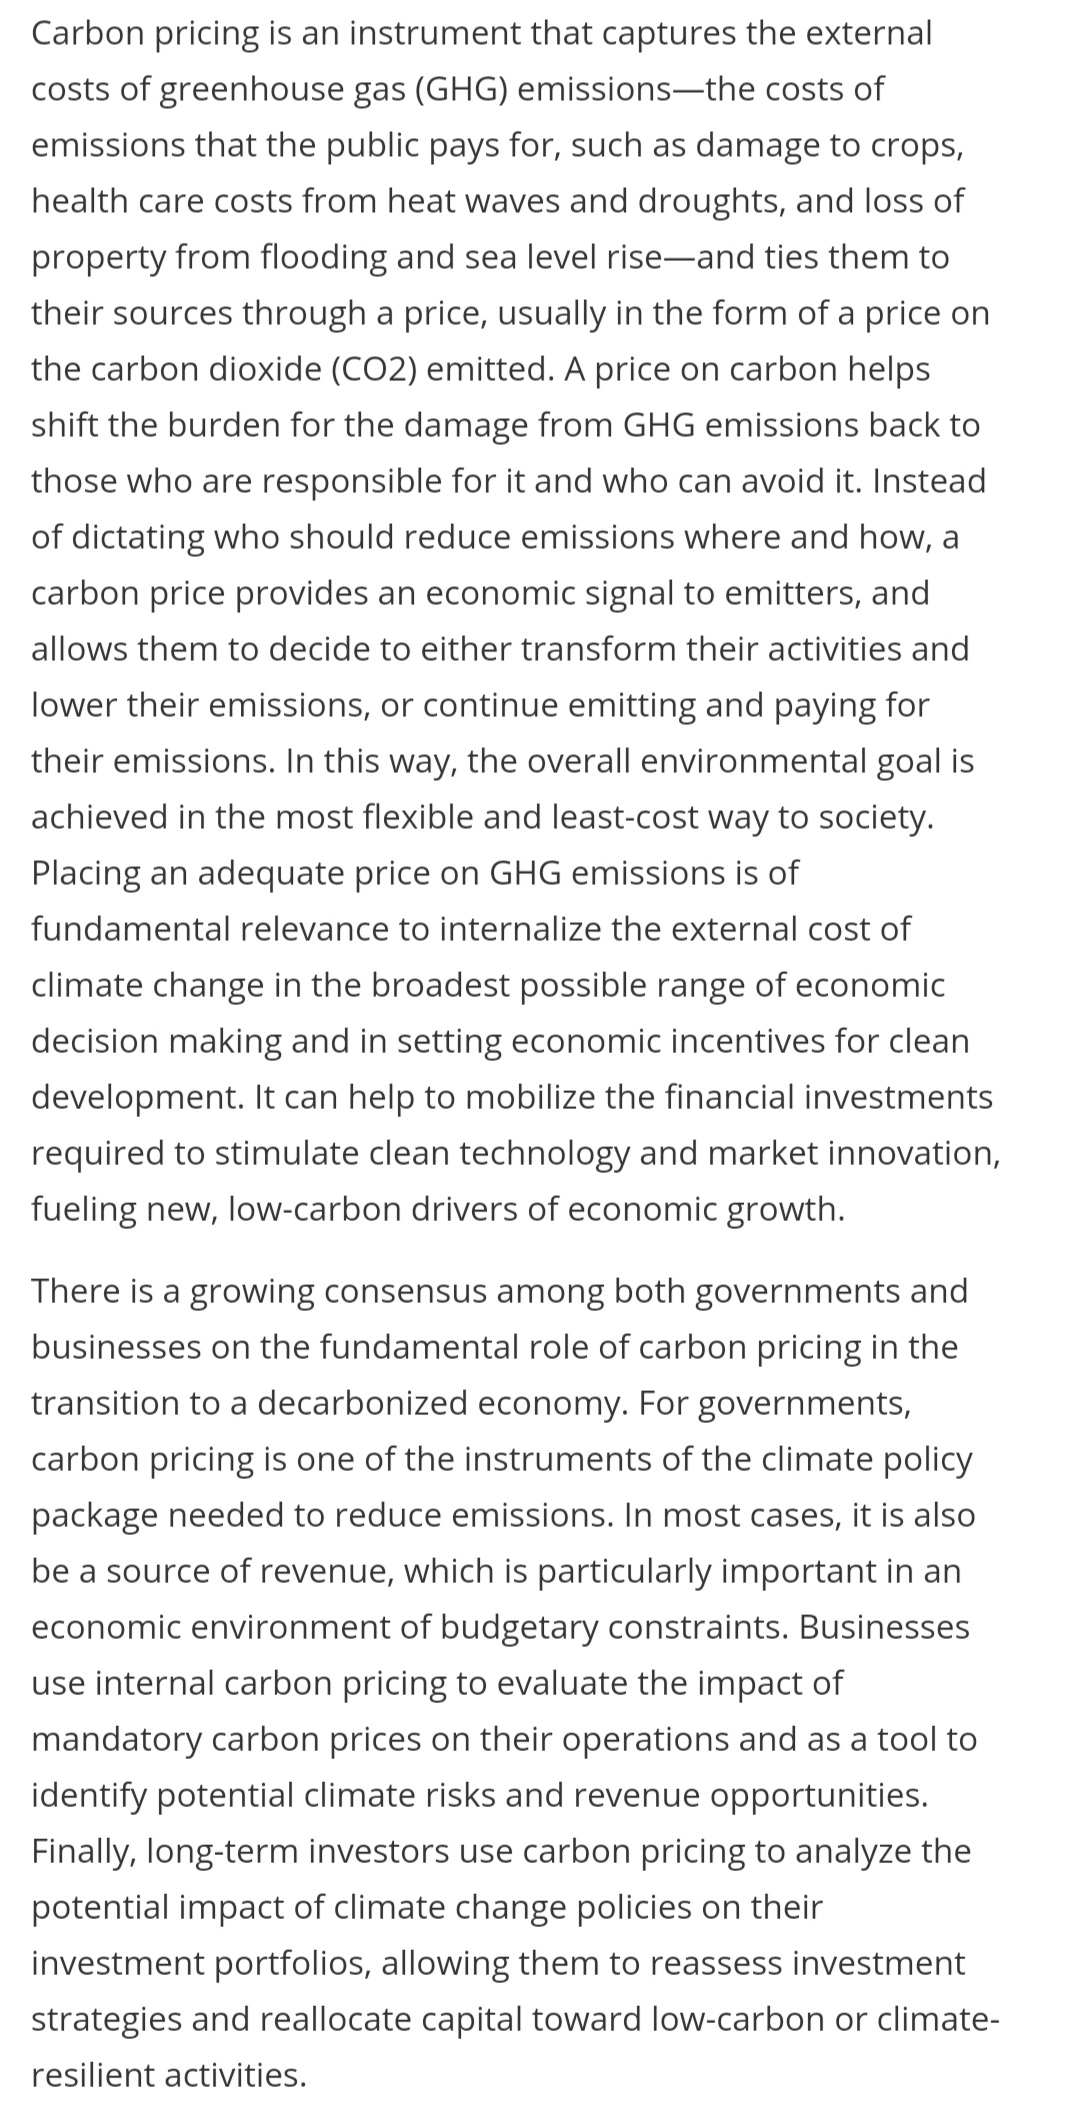 Carbon pricing is an instrument that captures the external
costs of greenhouse gas (GHG) emissions-the costs of
emissions that the public pays for, such as damage to crops,
health care costs from heat waves and droughts, and loss of
property from flooding and sea level rise-and ties them to
their sources through a price, usually in the form of a price on
the carbon dioxide (CO2) emitted. A price on carbon helps
shift the burden for the damage from GHG emissions back to
those who are responsible for it and who can avoid it. Instead
of dictating who should reduce emissions where and how, a
carbon price provides an economic signal to emitters, and
allows them to decide to either transform their activities and
lower their emissions, or continue emitting and paying for
their emissions. In this way, the overall environmental goal is
achieved in the most flexible and least-cost way to society.
Placing an adequate price on GHG emissions is of
fundamental relevance to internalize the external cost of
climate change in the broadest possible range of economic
decision making and in setting economic incentives for clean
development. It can help to mobilize the financial investments
required to stimulate clean technology and market innovation,
fueling new, low-carbon drivers of economic growth.
There is a growing consensus among both governments and
businesses on the fundamental role of carbon pricing in the
transition to a decarbonized economy. For governments,
carbon pricing is one of the instruments of the climate policy
package needed to reduce emissions. In most cases, it is also
be a source of revenue, which is particularly important in an
economic environment of budgetary constraints. Businesses
use internal carbon pricing to evaluate the impact of
mandatory carbon prices on their operations and as a tool to
identify potential climate risks and revenue opportunities.
Finally, long-term investors use carbon pricing to analyze the
potential impact of climate change policies on their
investment portfolios, allowing them to reassess investment
strategies and reallocate capital toward low-carbon or climate-
resilient activities.
